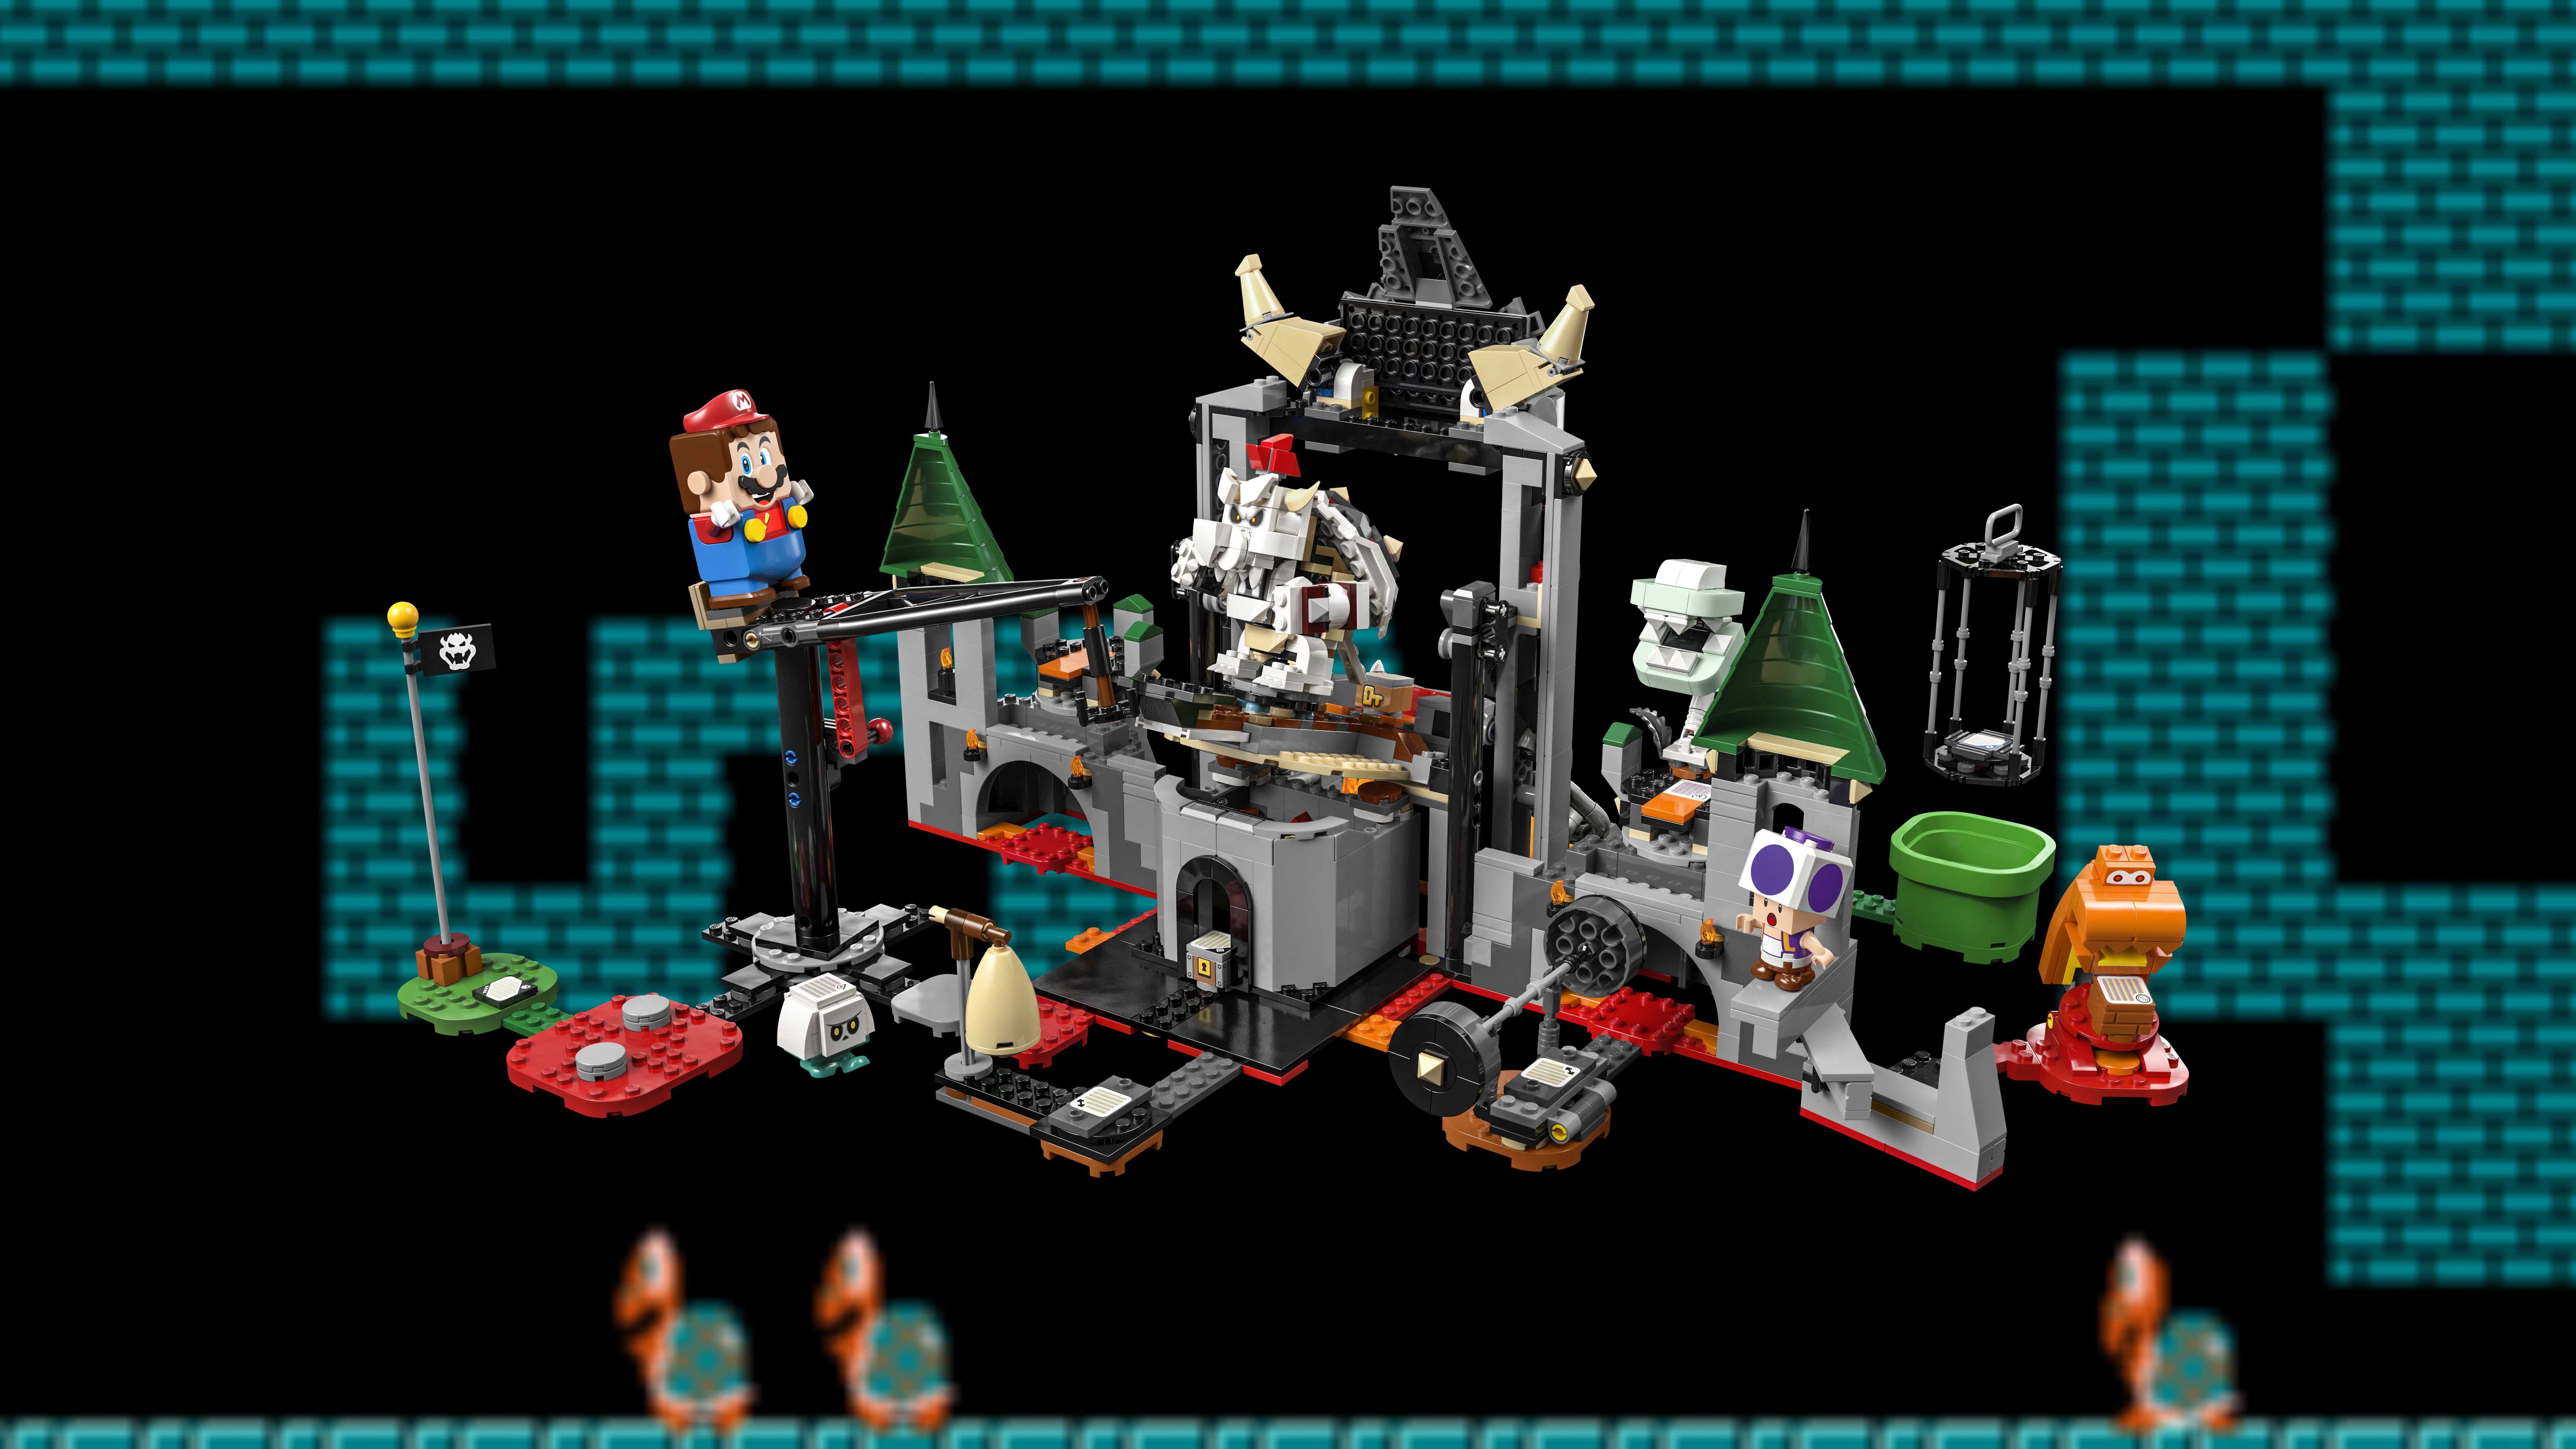 Lego’s latest Super Mario set takes you to Dry Bowser’s Castle